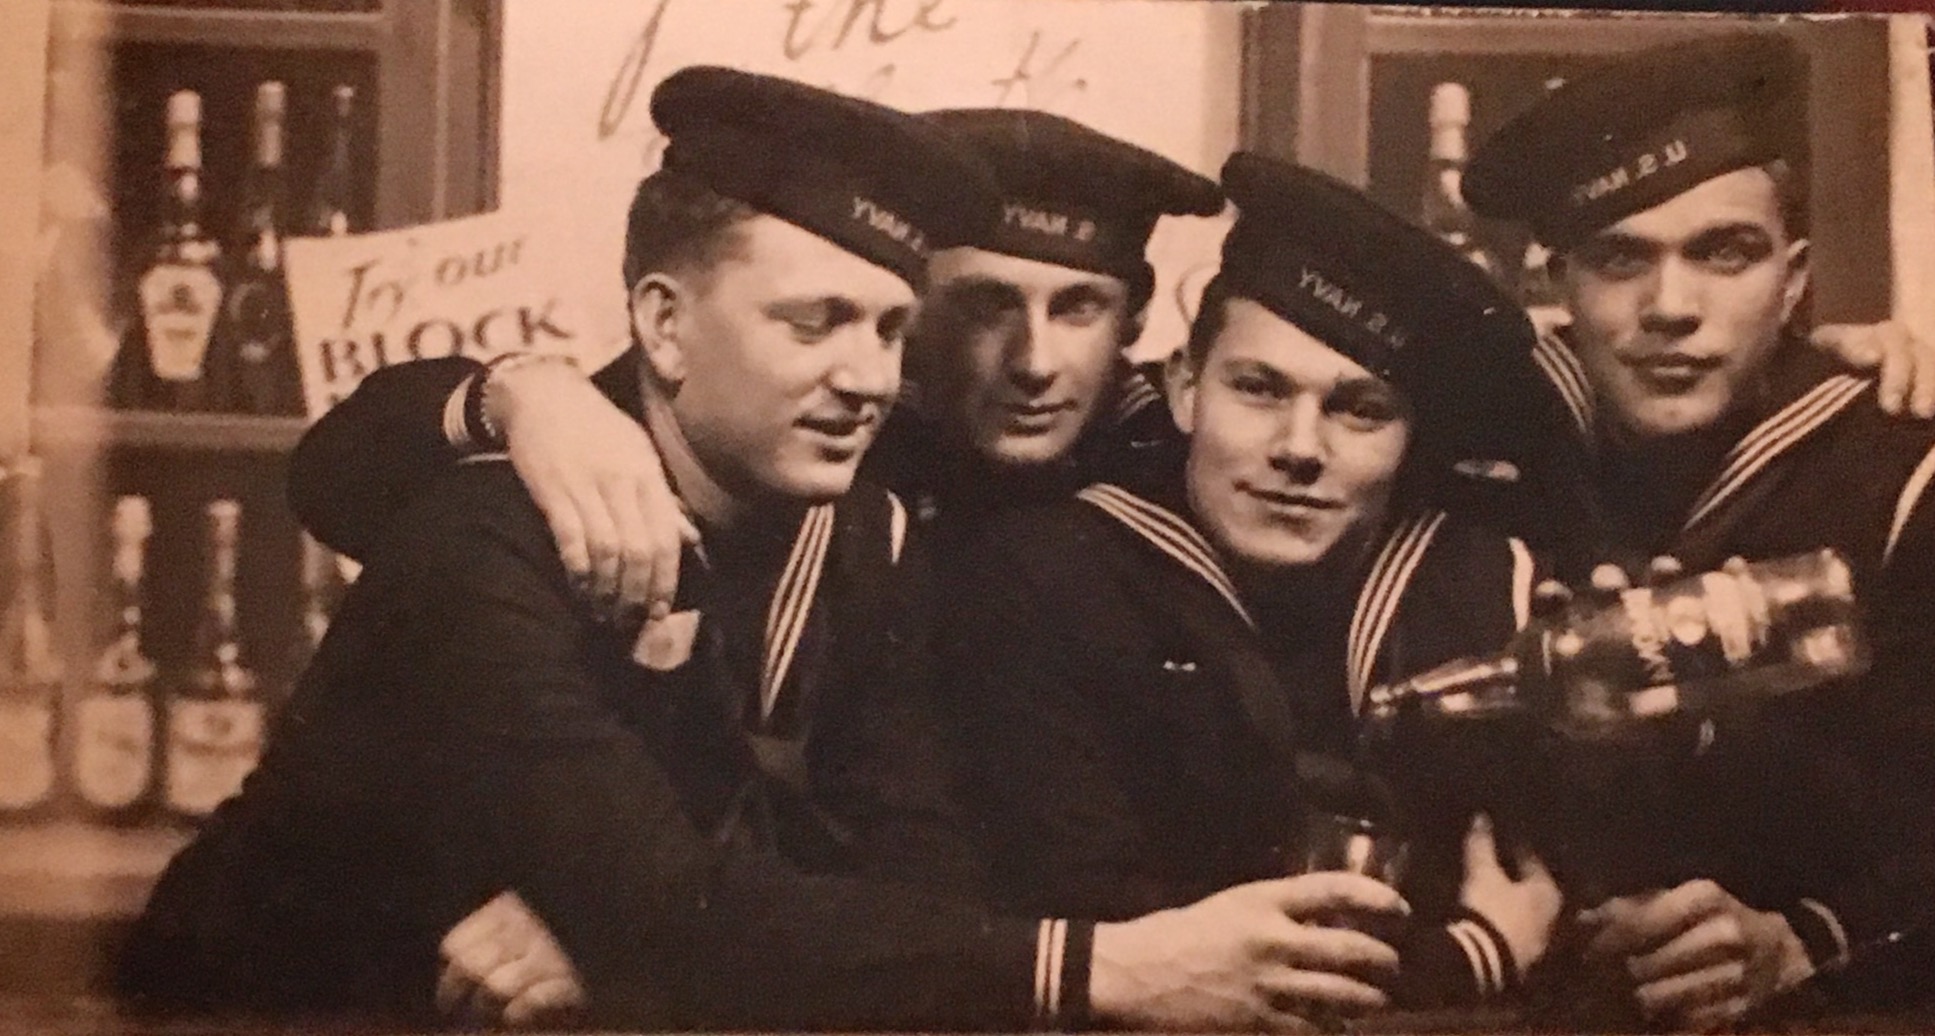 My dad Wally on left and his mates.  Submarine sailors in South Pacific 1943 WWII.
